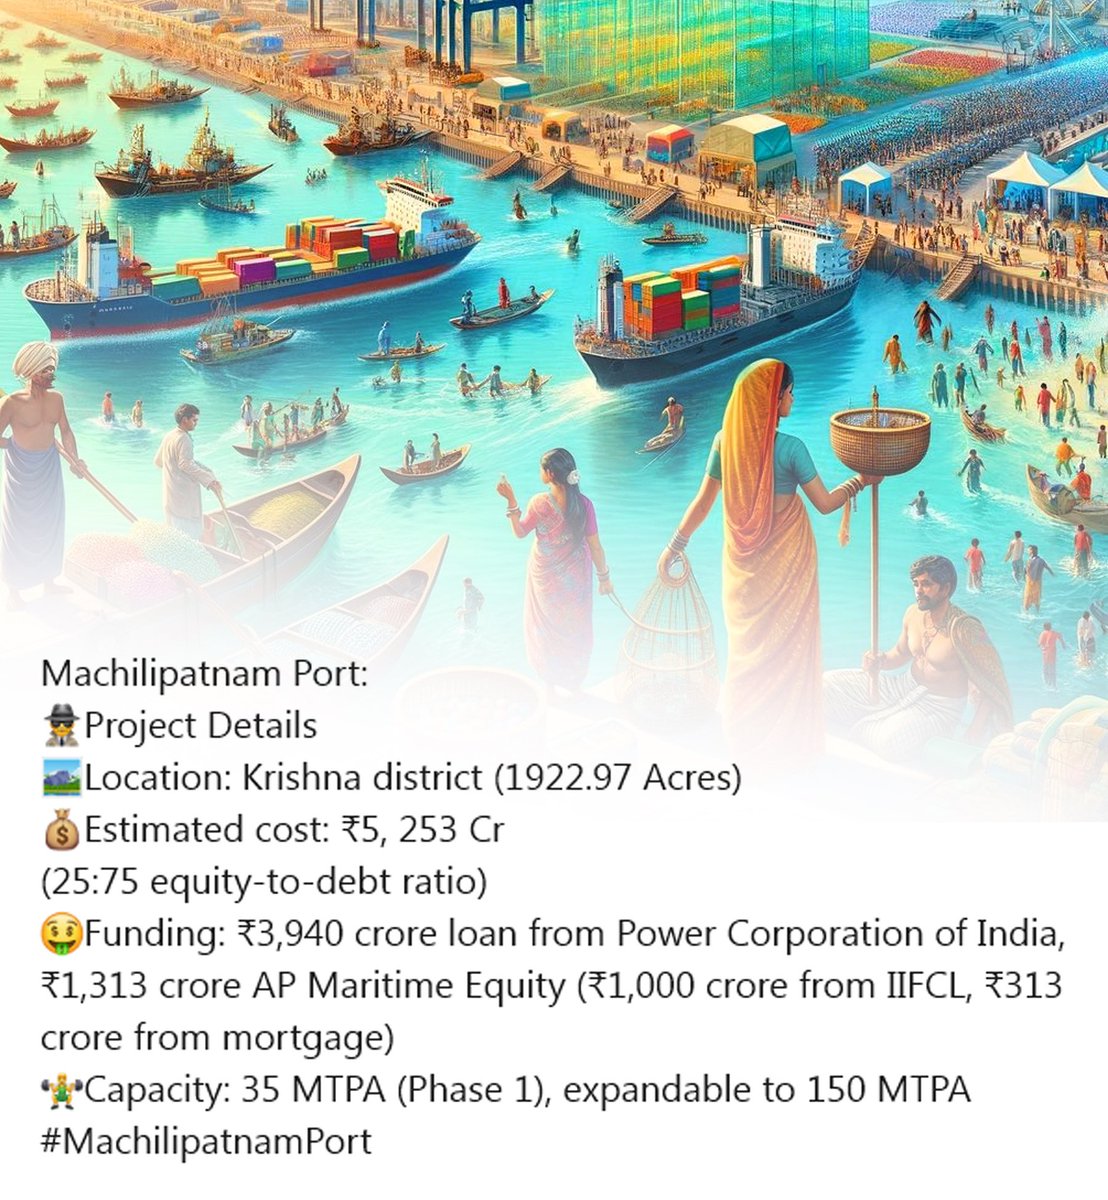 7/16 Machilipatnam Port: (2)
🐬Impact on Blue Economy and State's Prosperity
🏭Attracted Industries: Bulk cargo, food processing, petrochemicals, logistics, automotive, textiles
📊Estimated GSDP boost: ₹2,250 crore annually. (First 2 Years)
📈Estimated annual revenue: ₹500 Cr